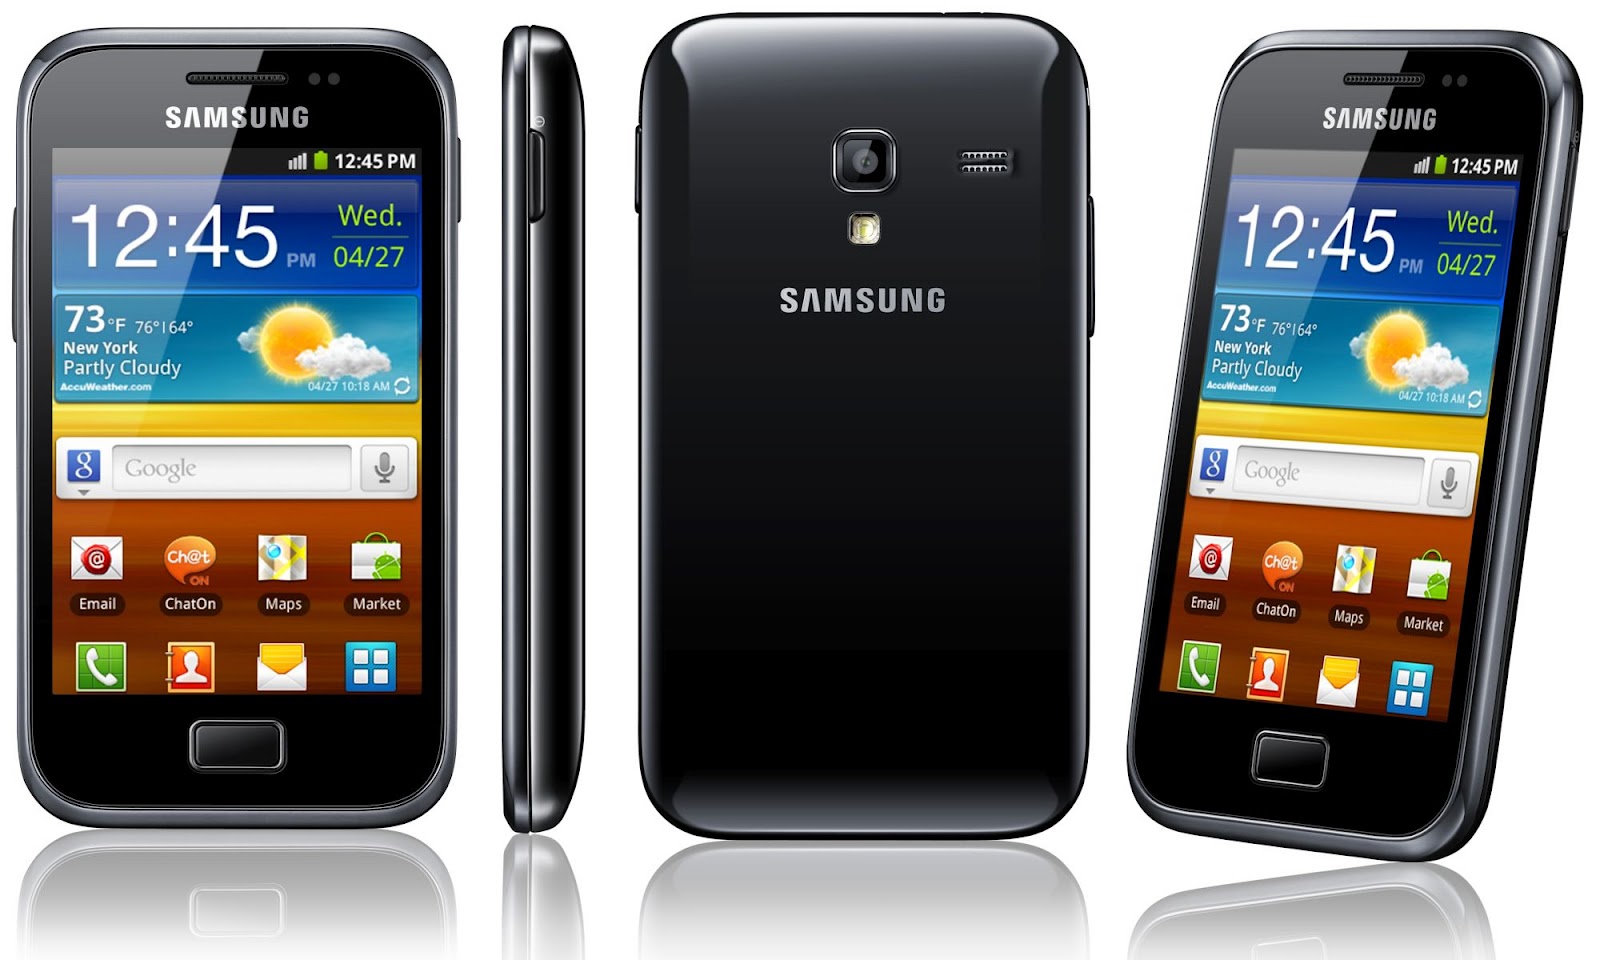 Samsung Galaxy Ace Plus Specifications Features Price Details , Samsung